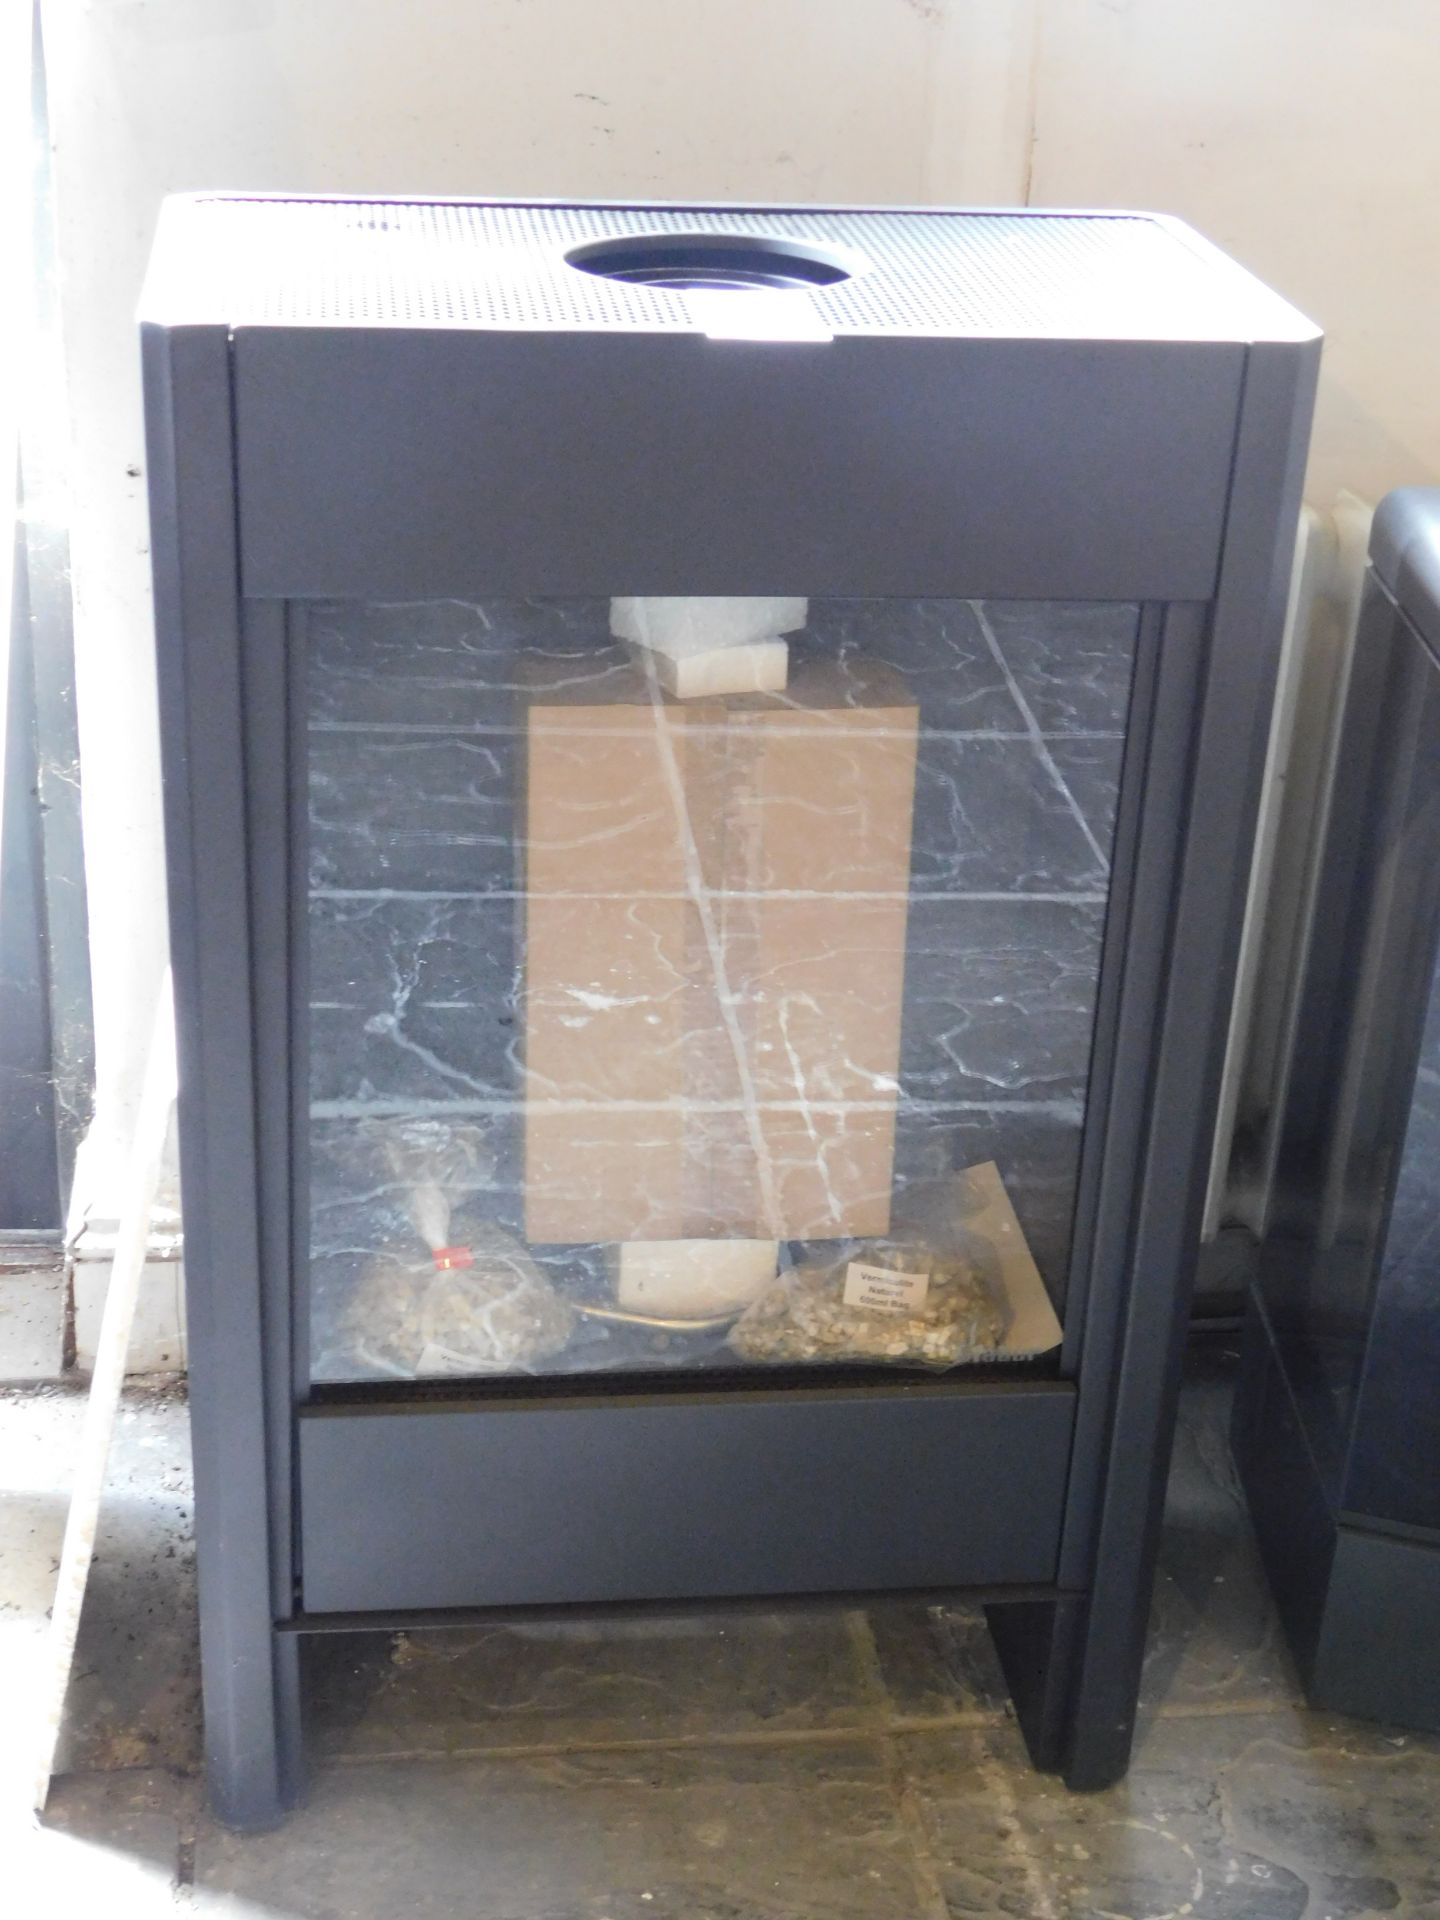 Ex-Display Unbadged Stove (Where the company’s description/price information is shown in the images,